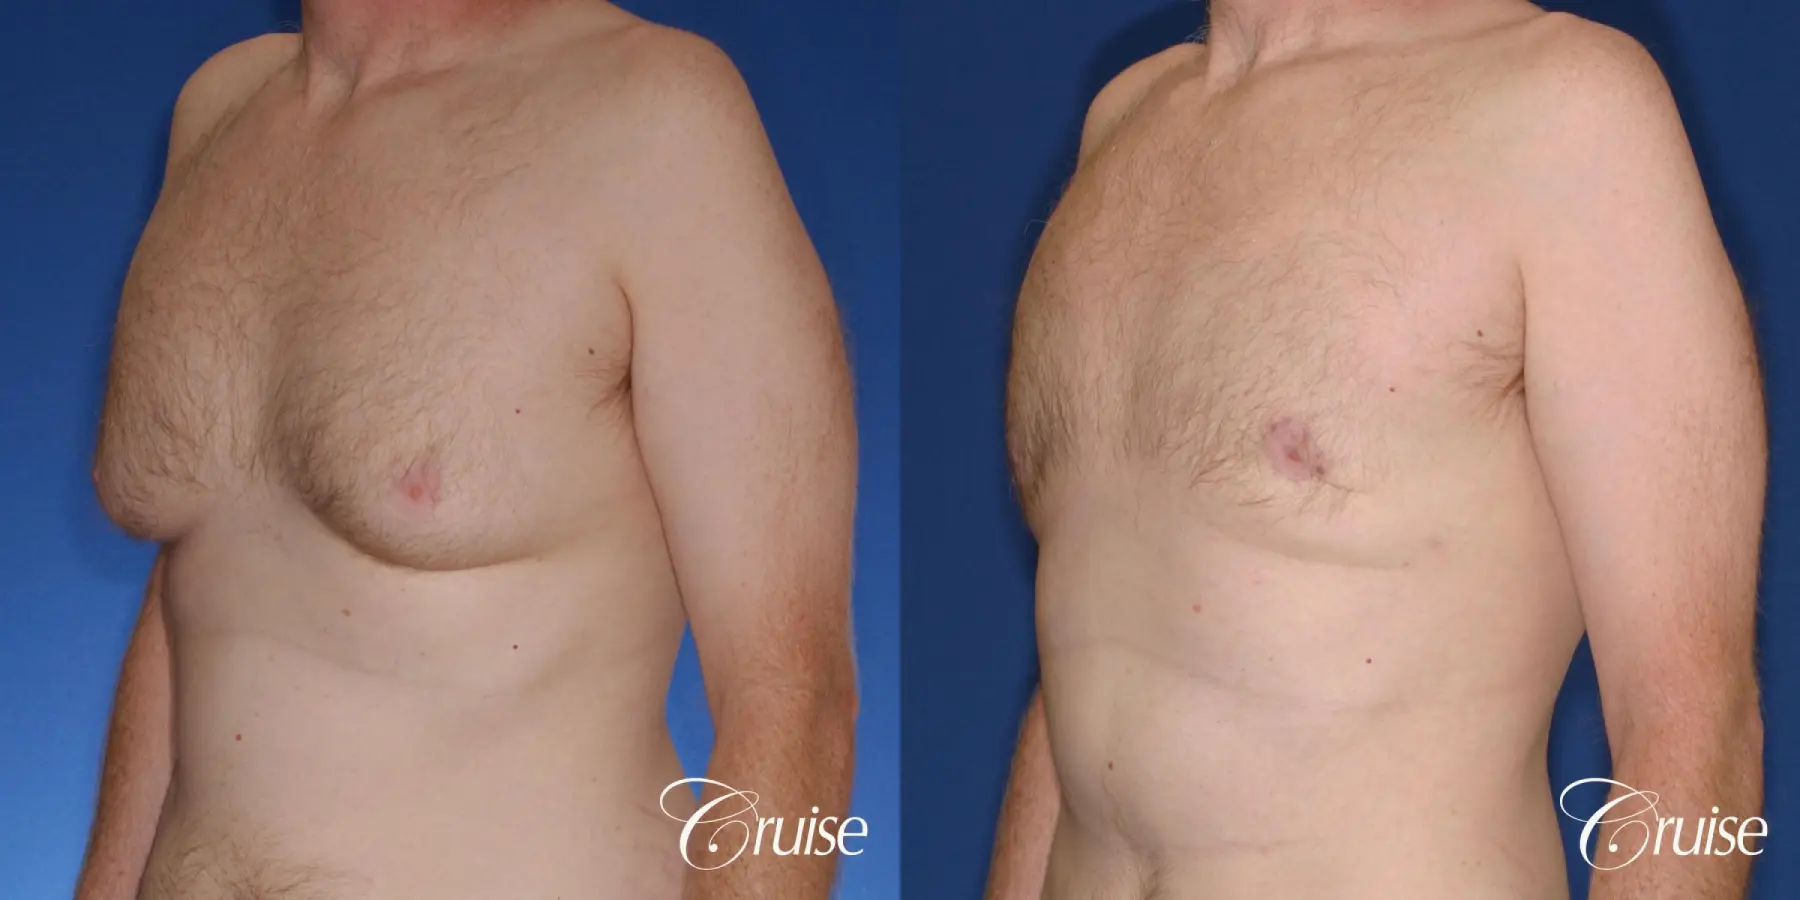 best donut lift with gynecomastia surgery - Before and After 2